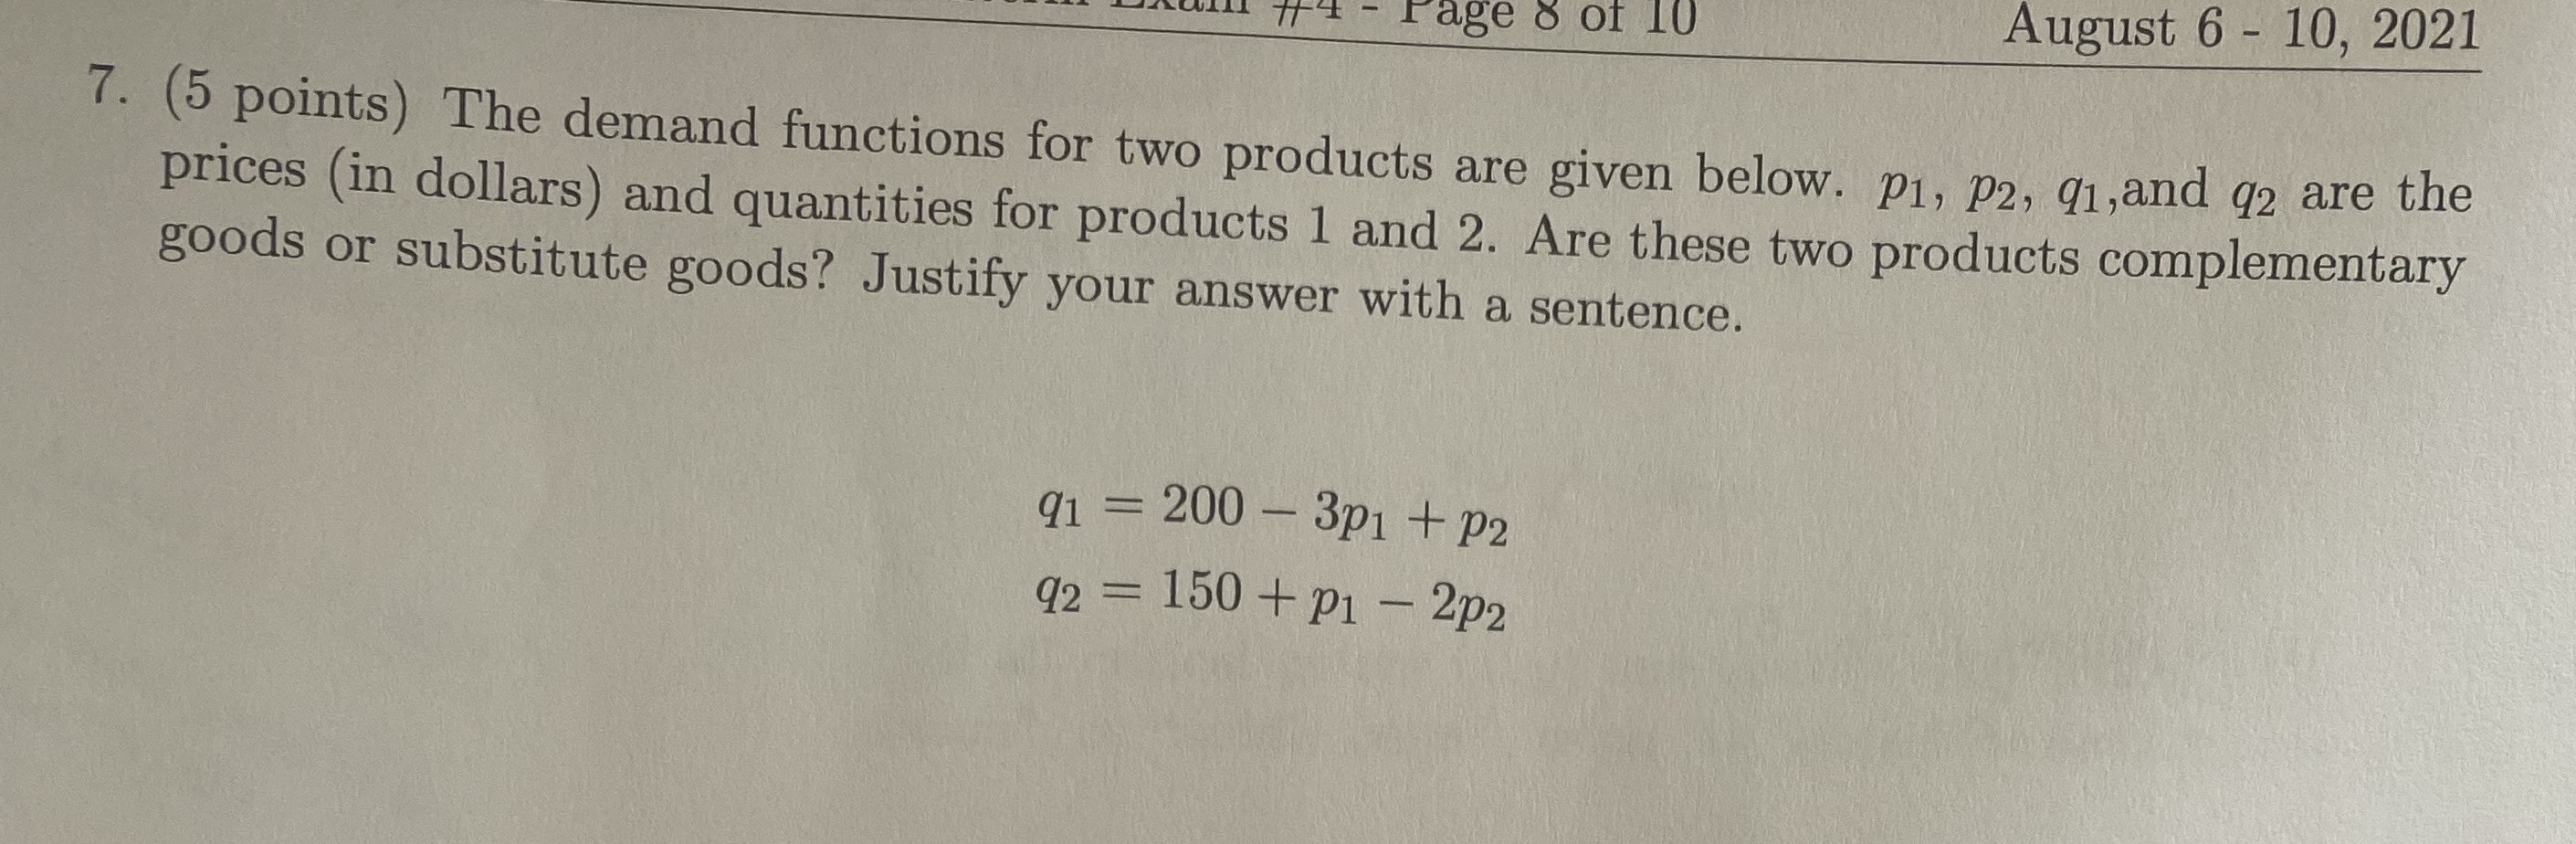 (5 points) The demand functions for two products a...